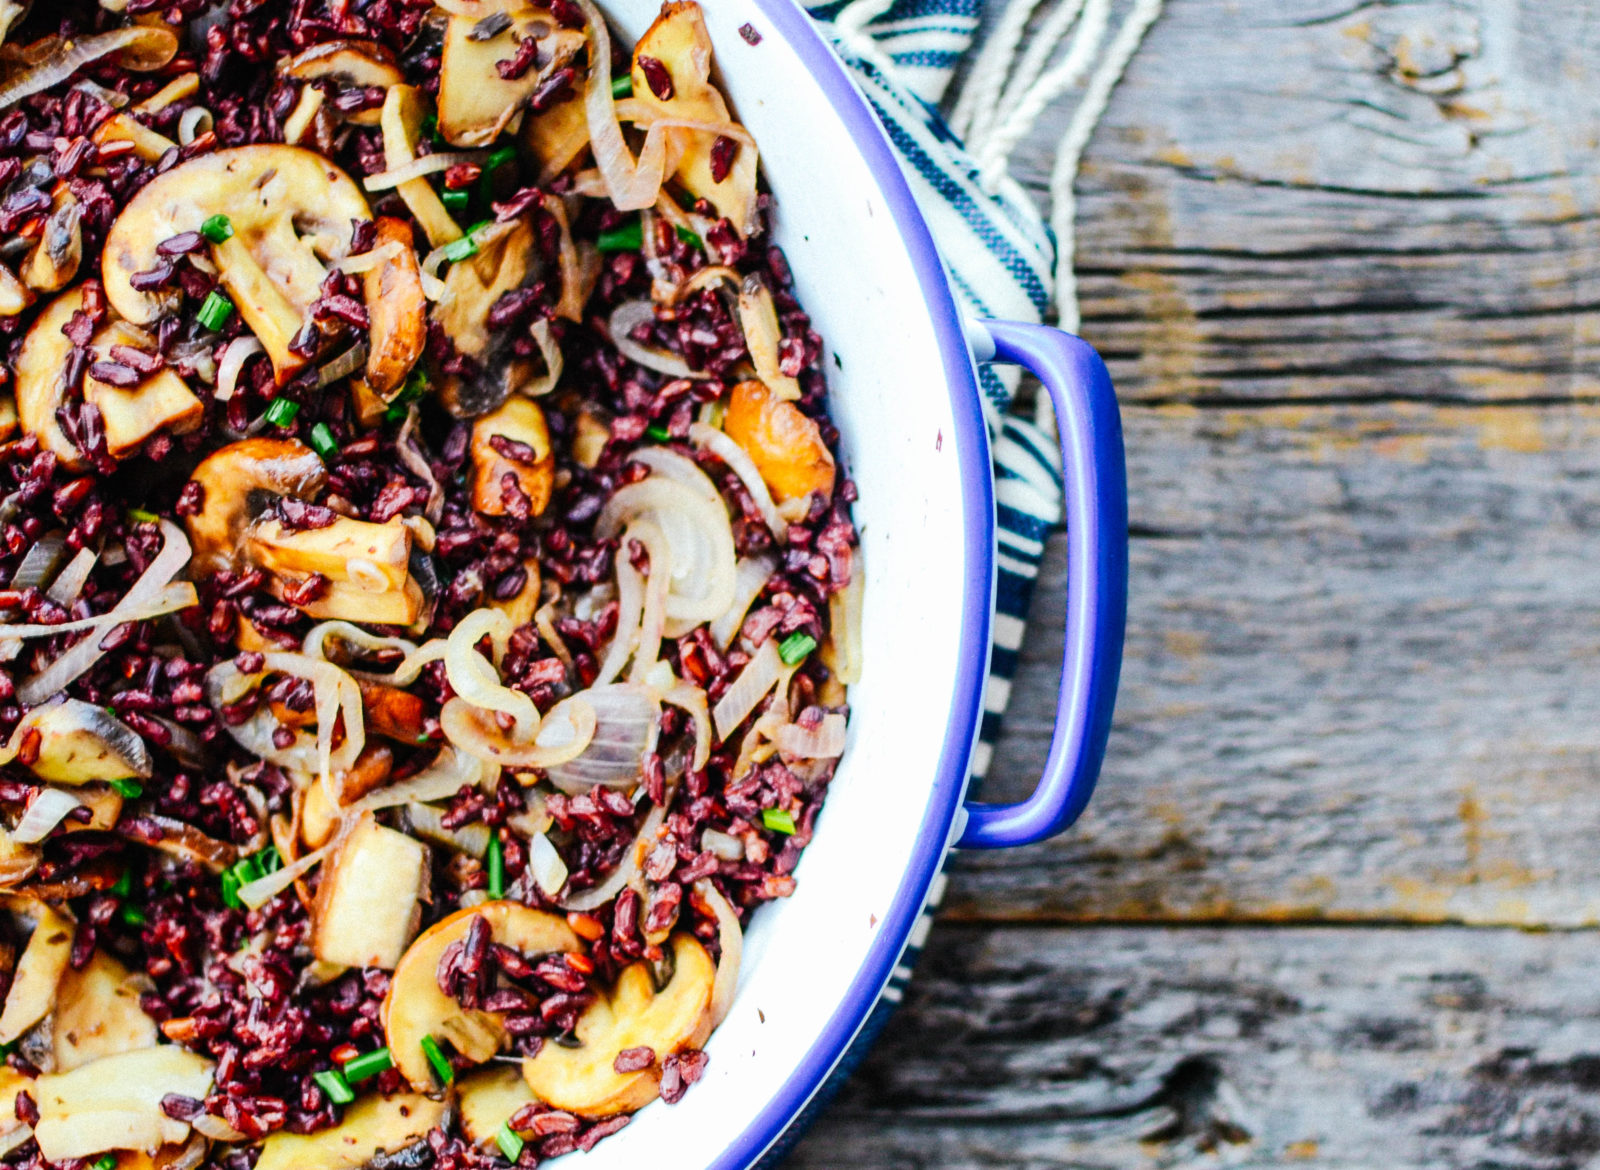 A delicious mushroom and black rice salad to serve up this holiday season. Eat it as a side or as your main dish for lunch or dinner.